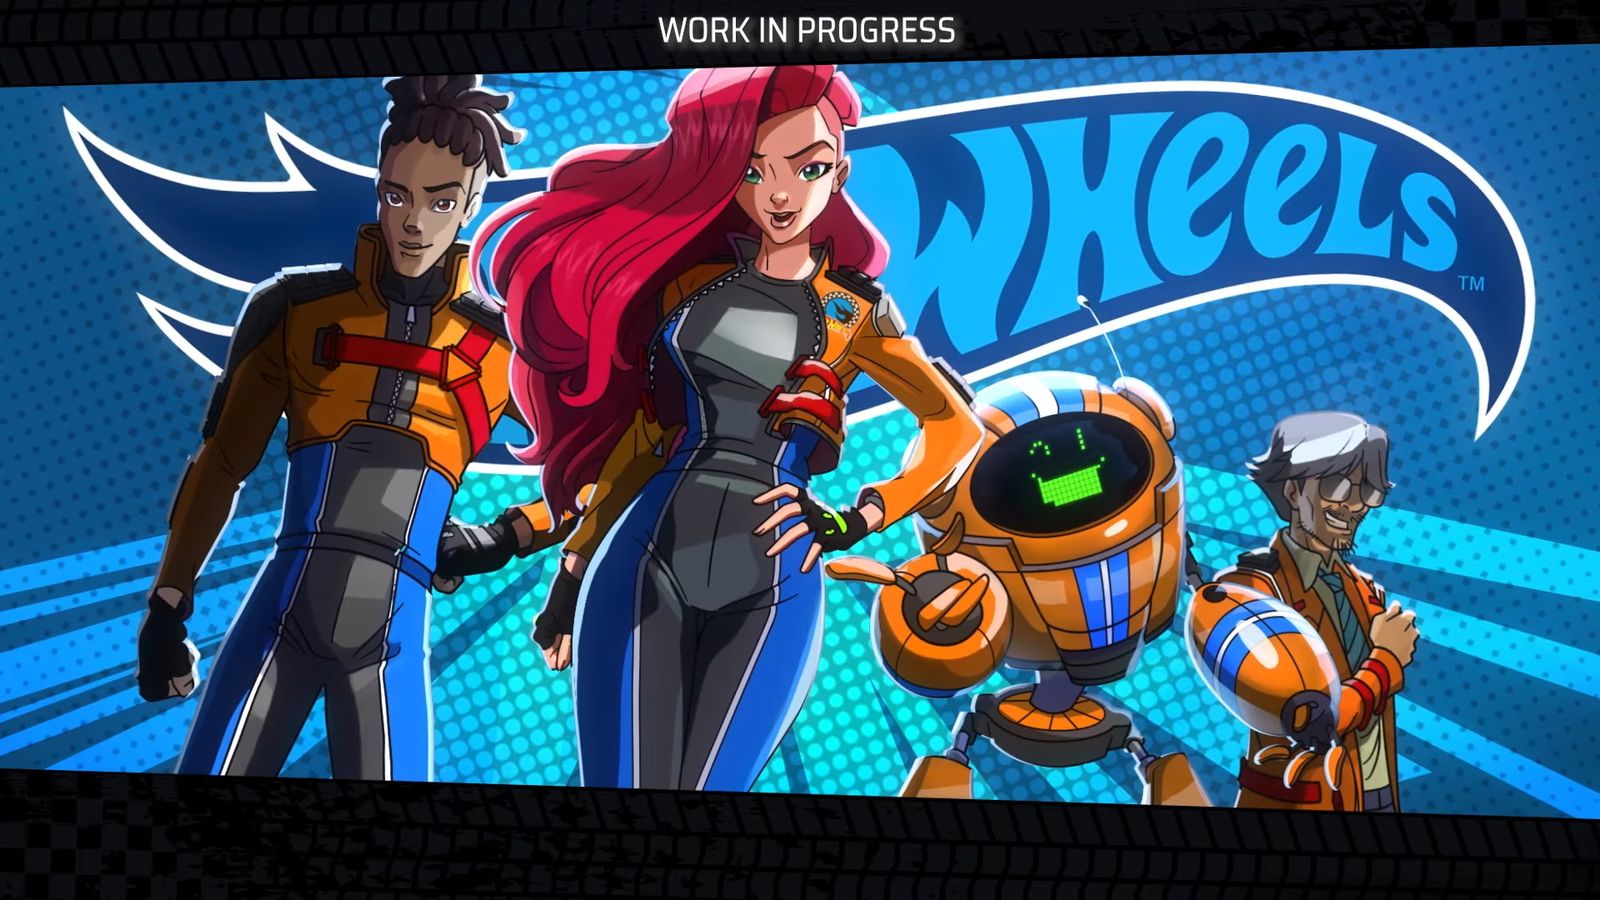 Hot Wheels Unleashed 2 story campaign characters